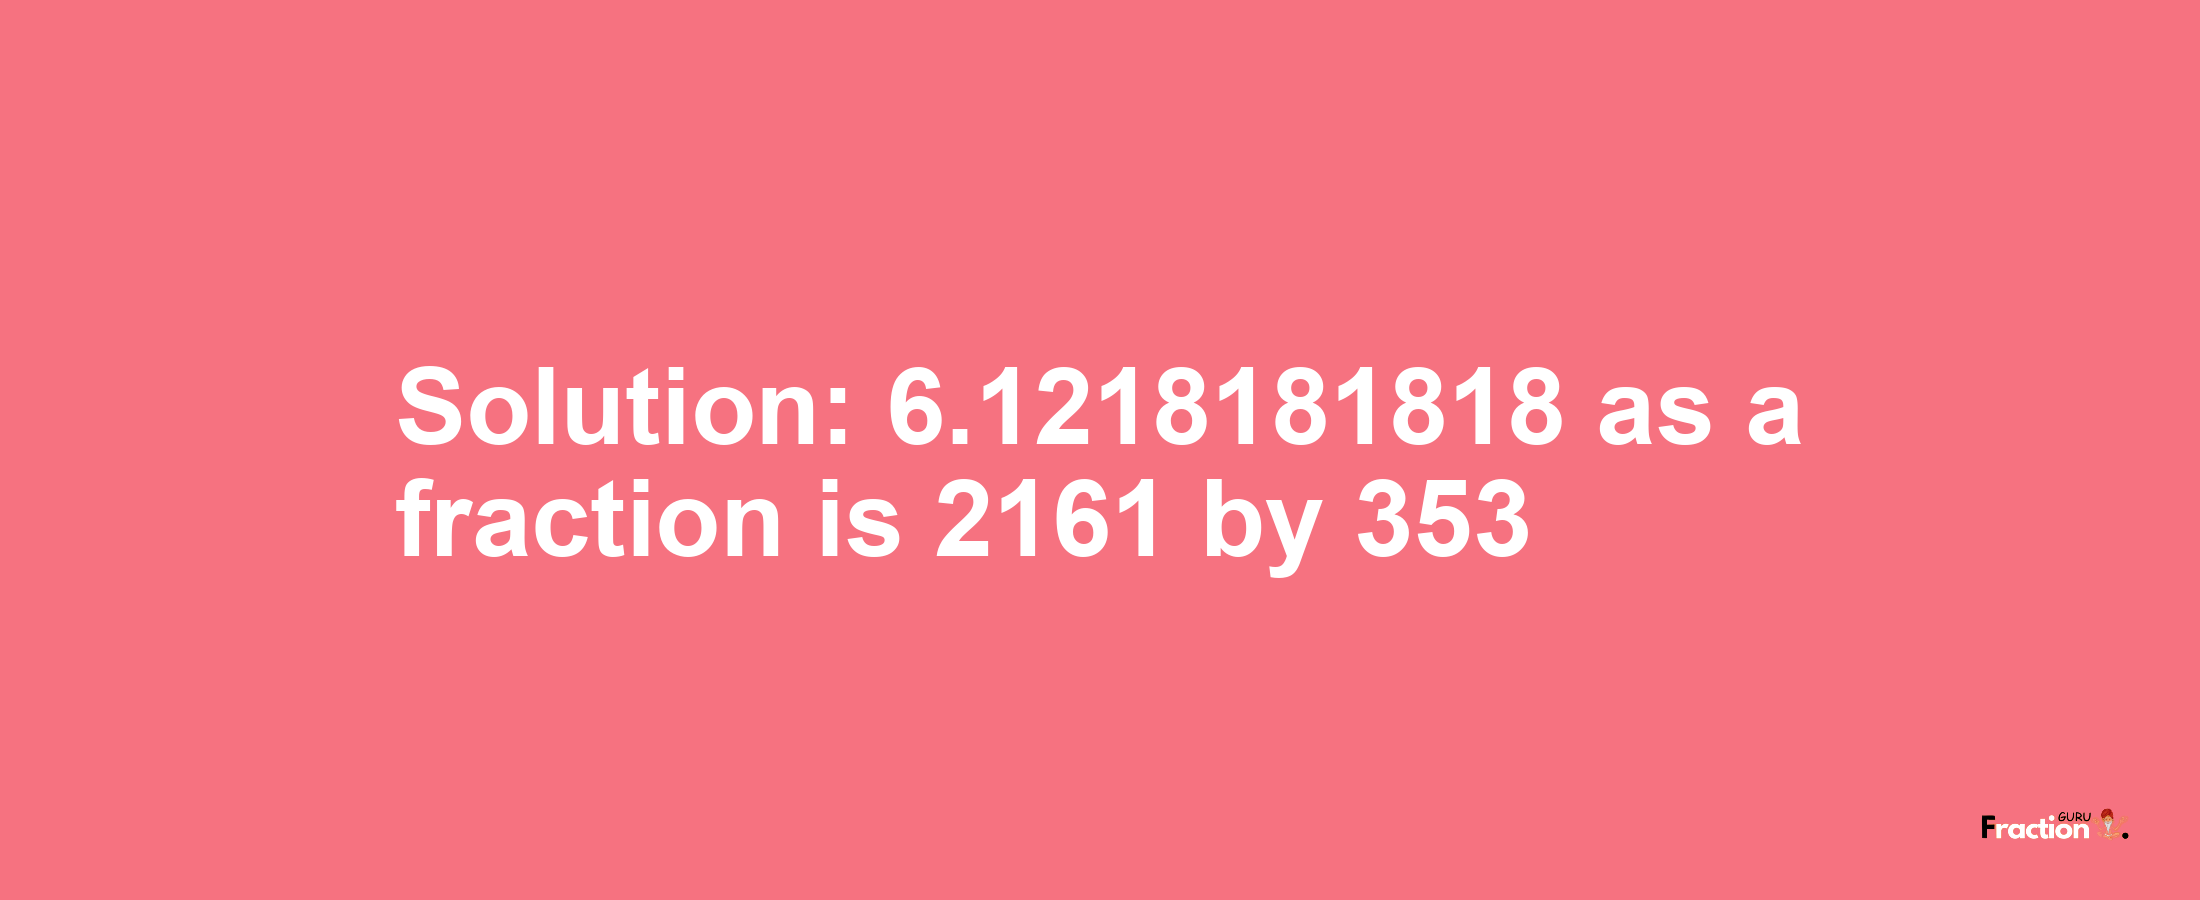 Solution:6.1218181818 as a fraction is 2161/353